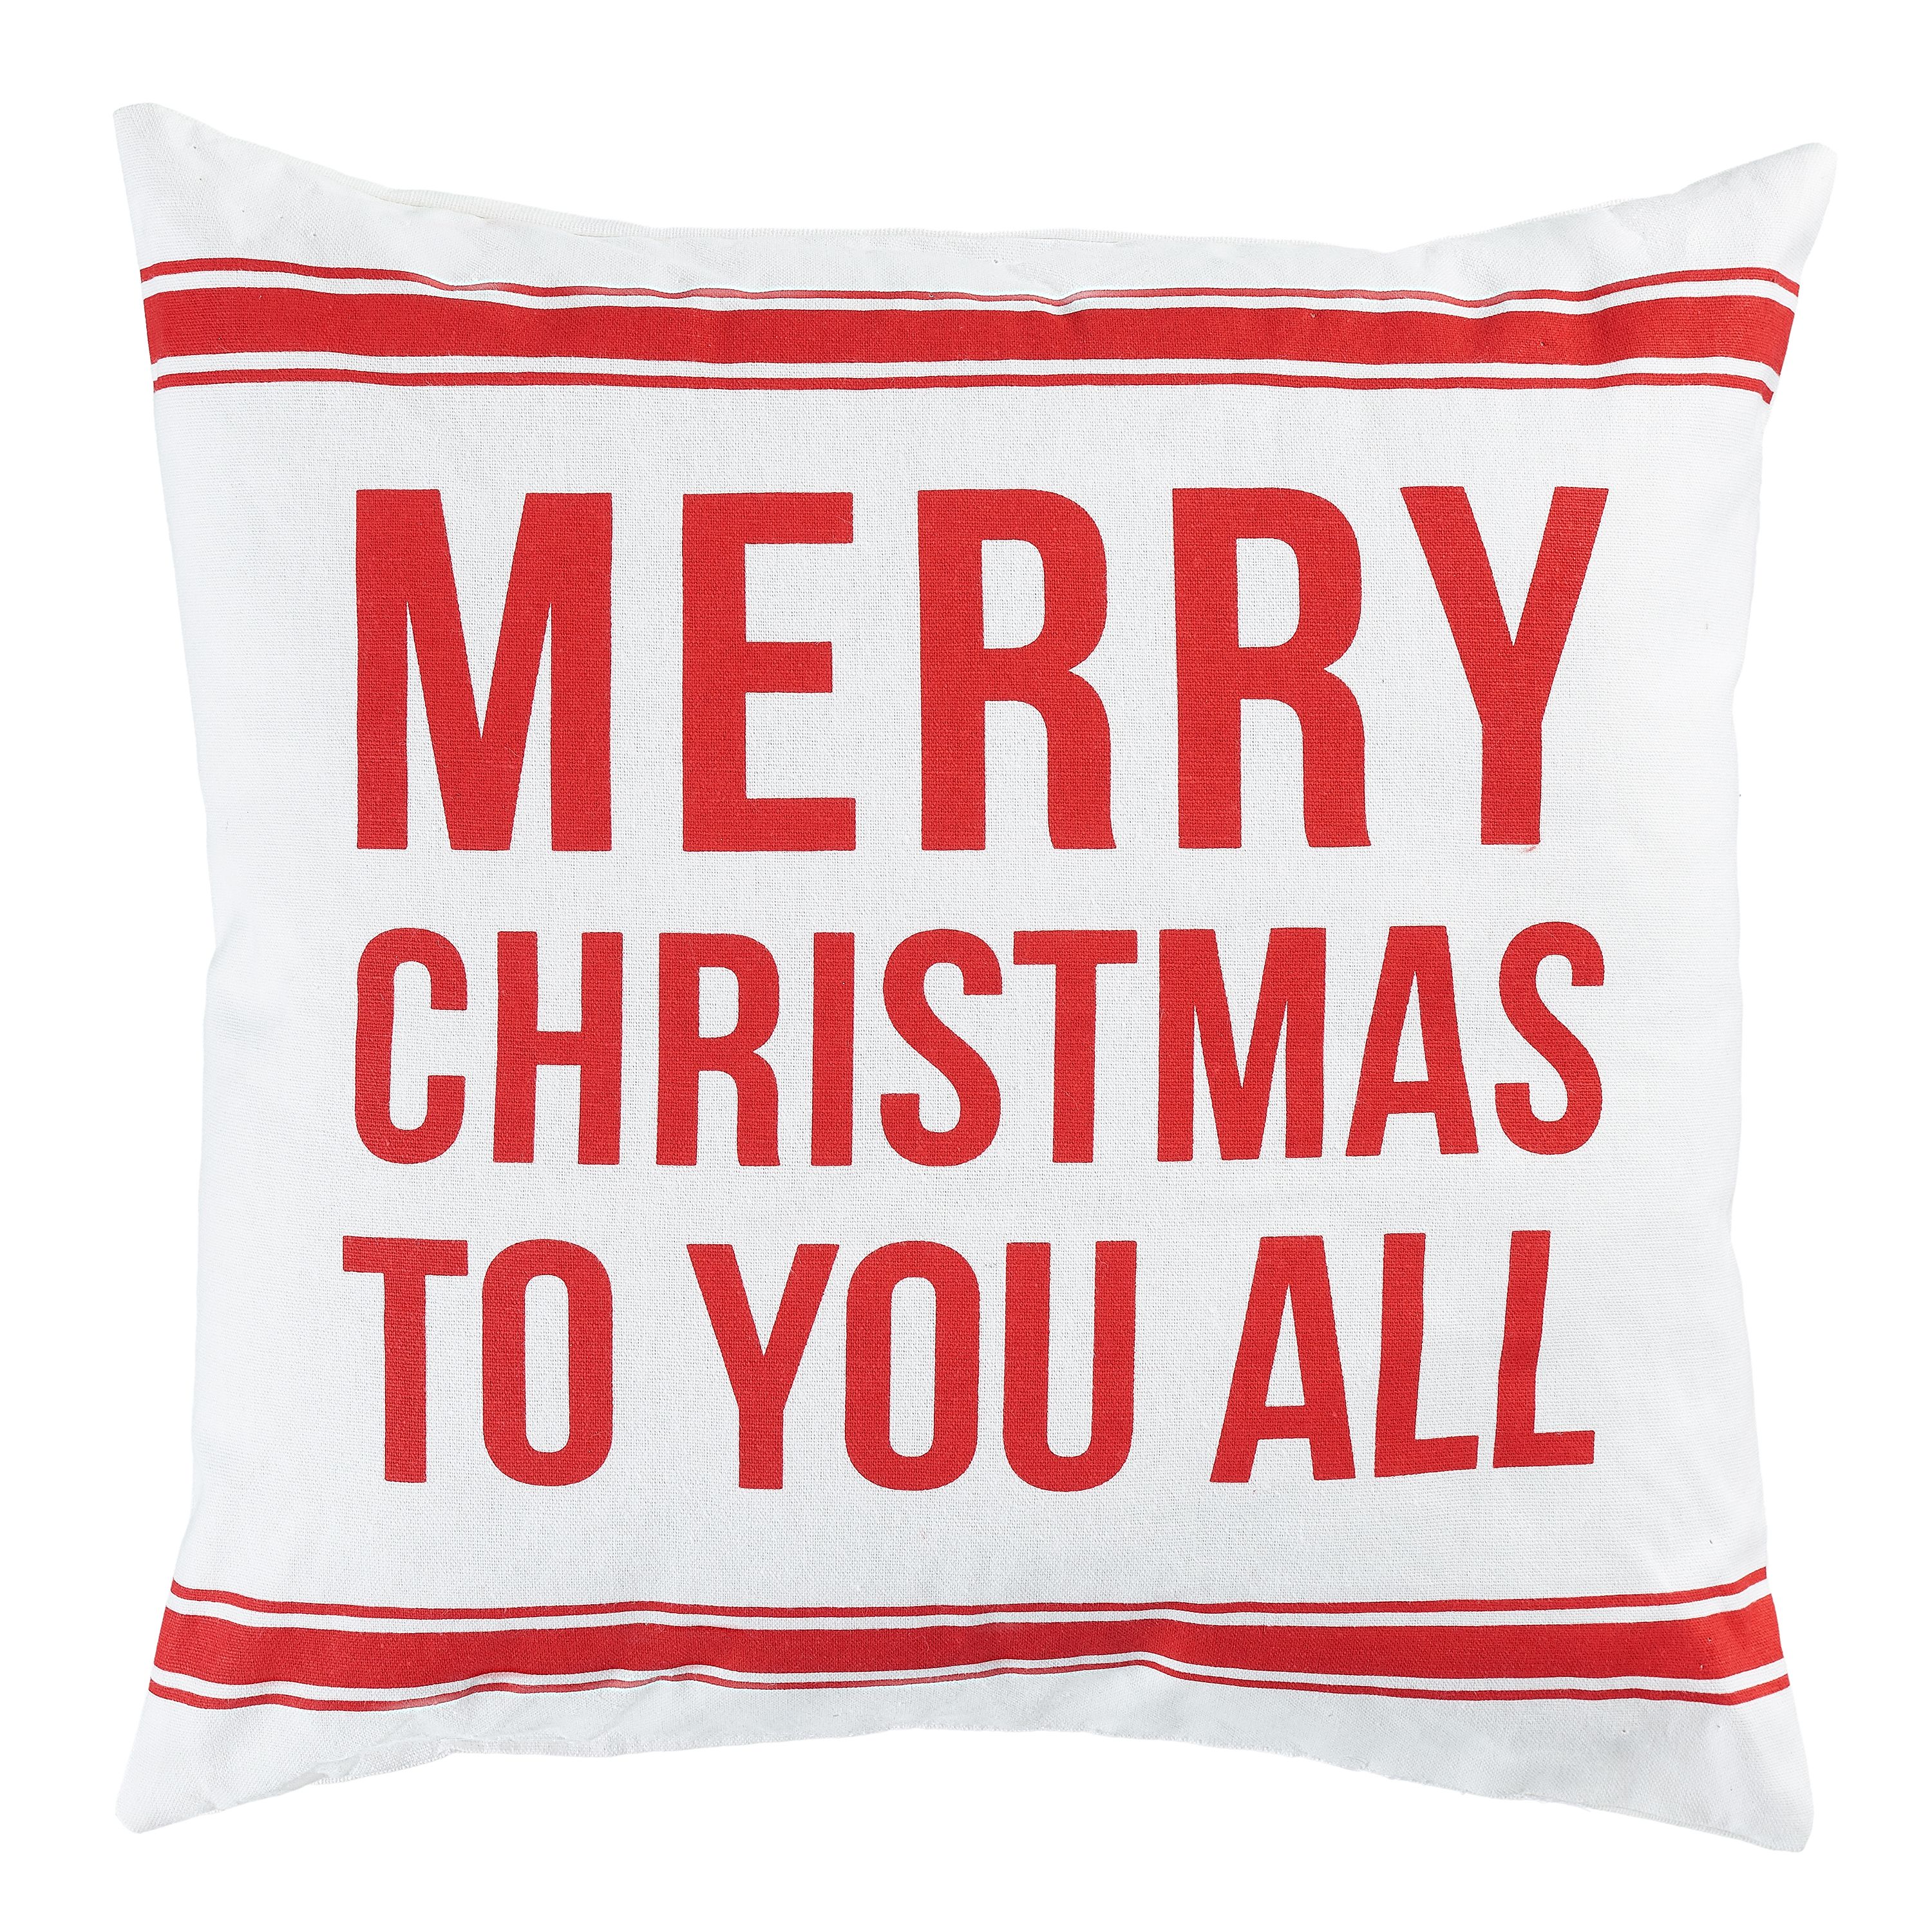 Holiday Time Merry Christmas to You All Decorative Throw Pillow, 16" x 16", White - image 1 of 5